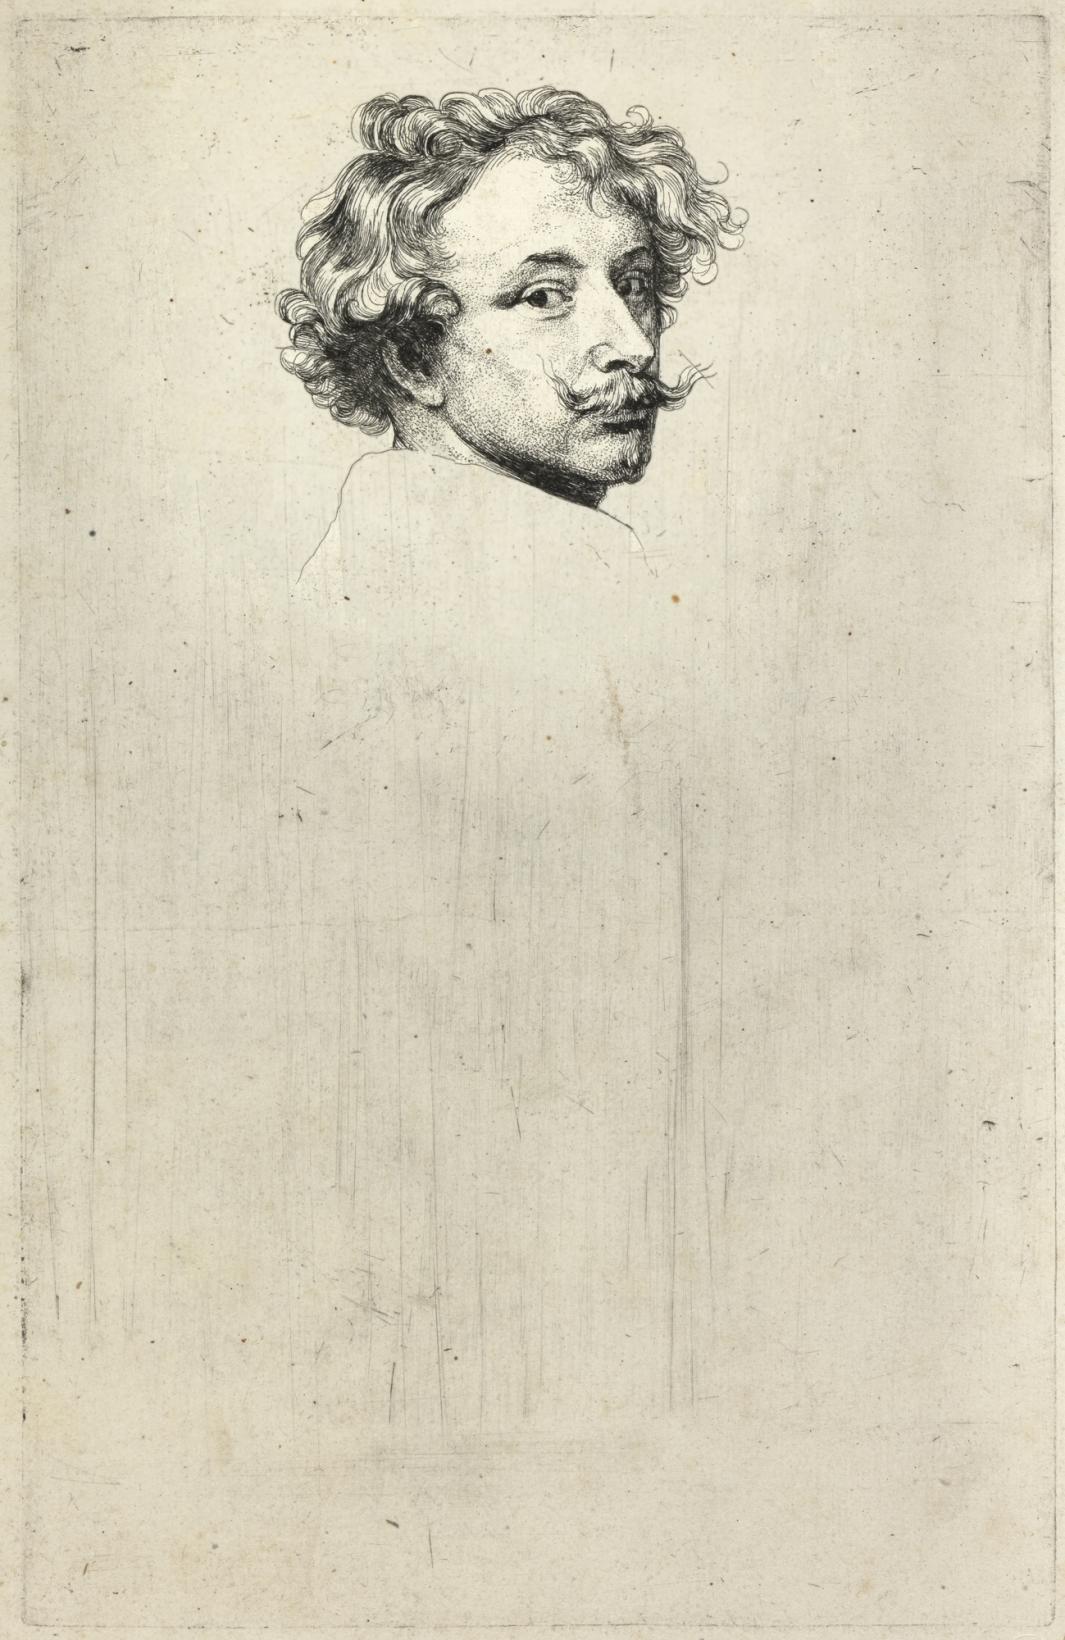 self portrait etching of Anthony Van Dyck, depicting man's face with curly hair and mustache at top of page